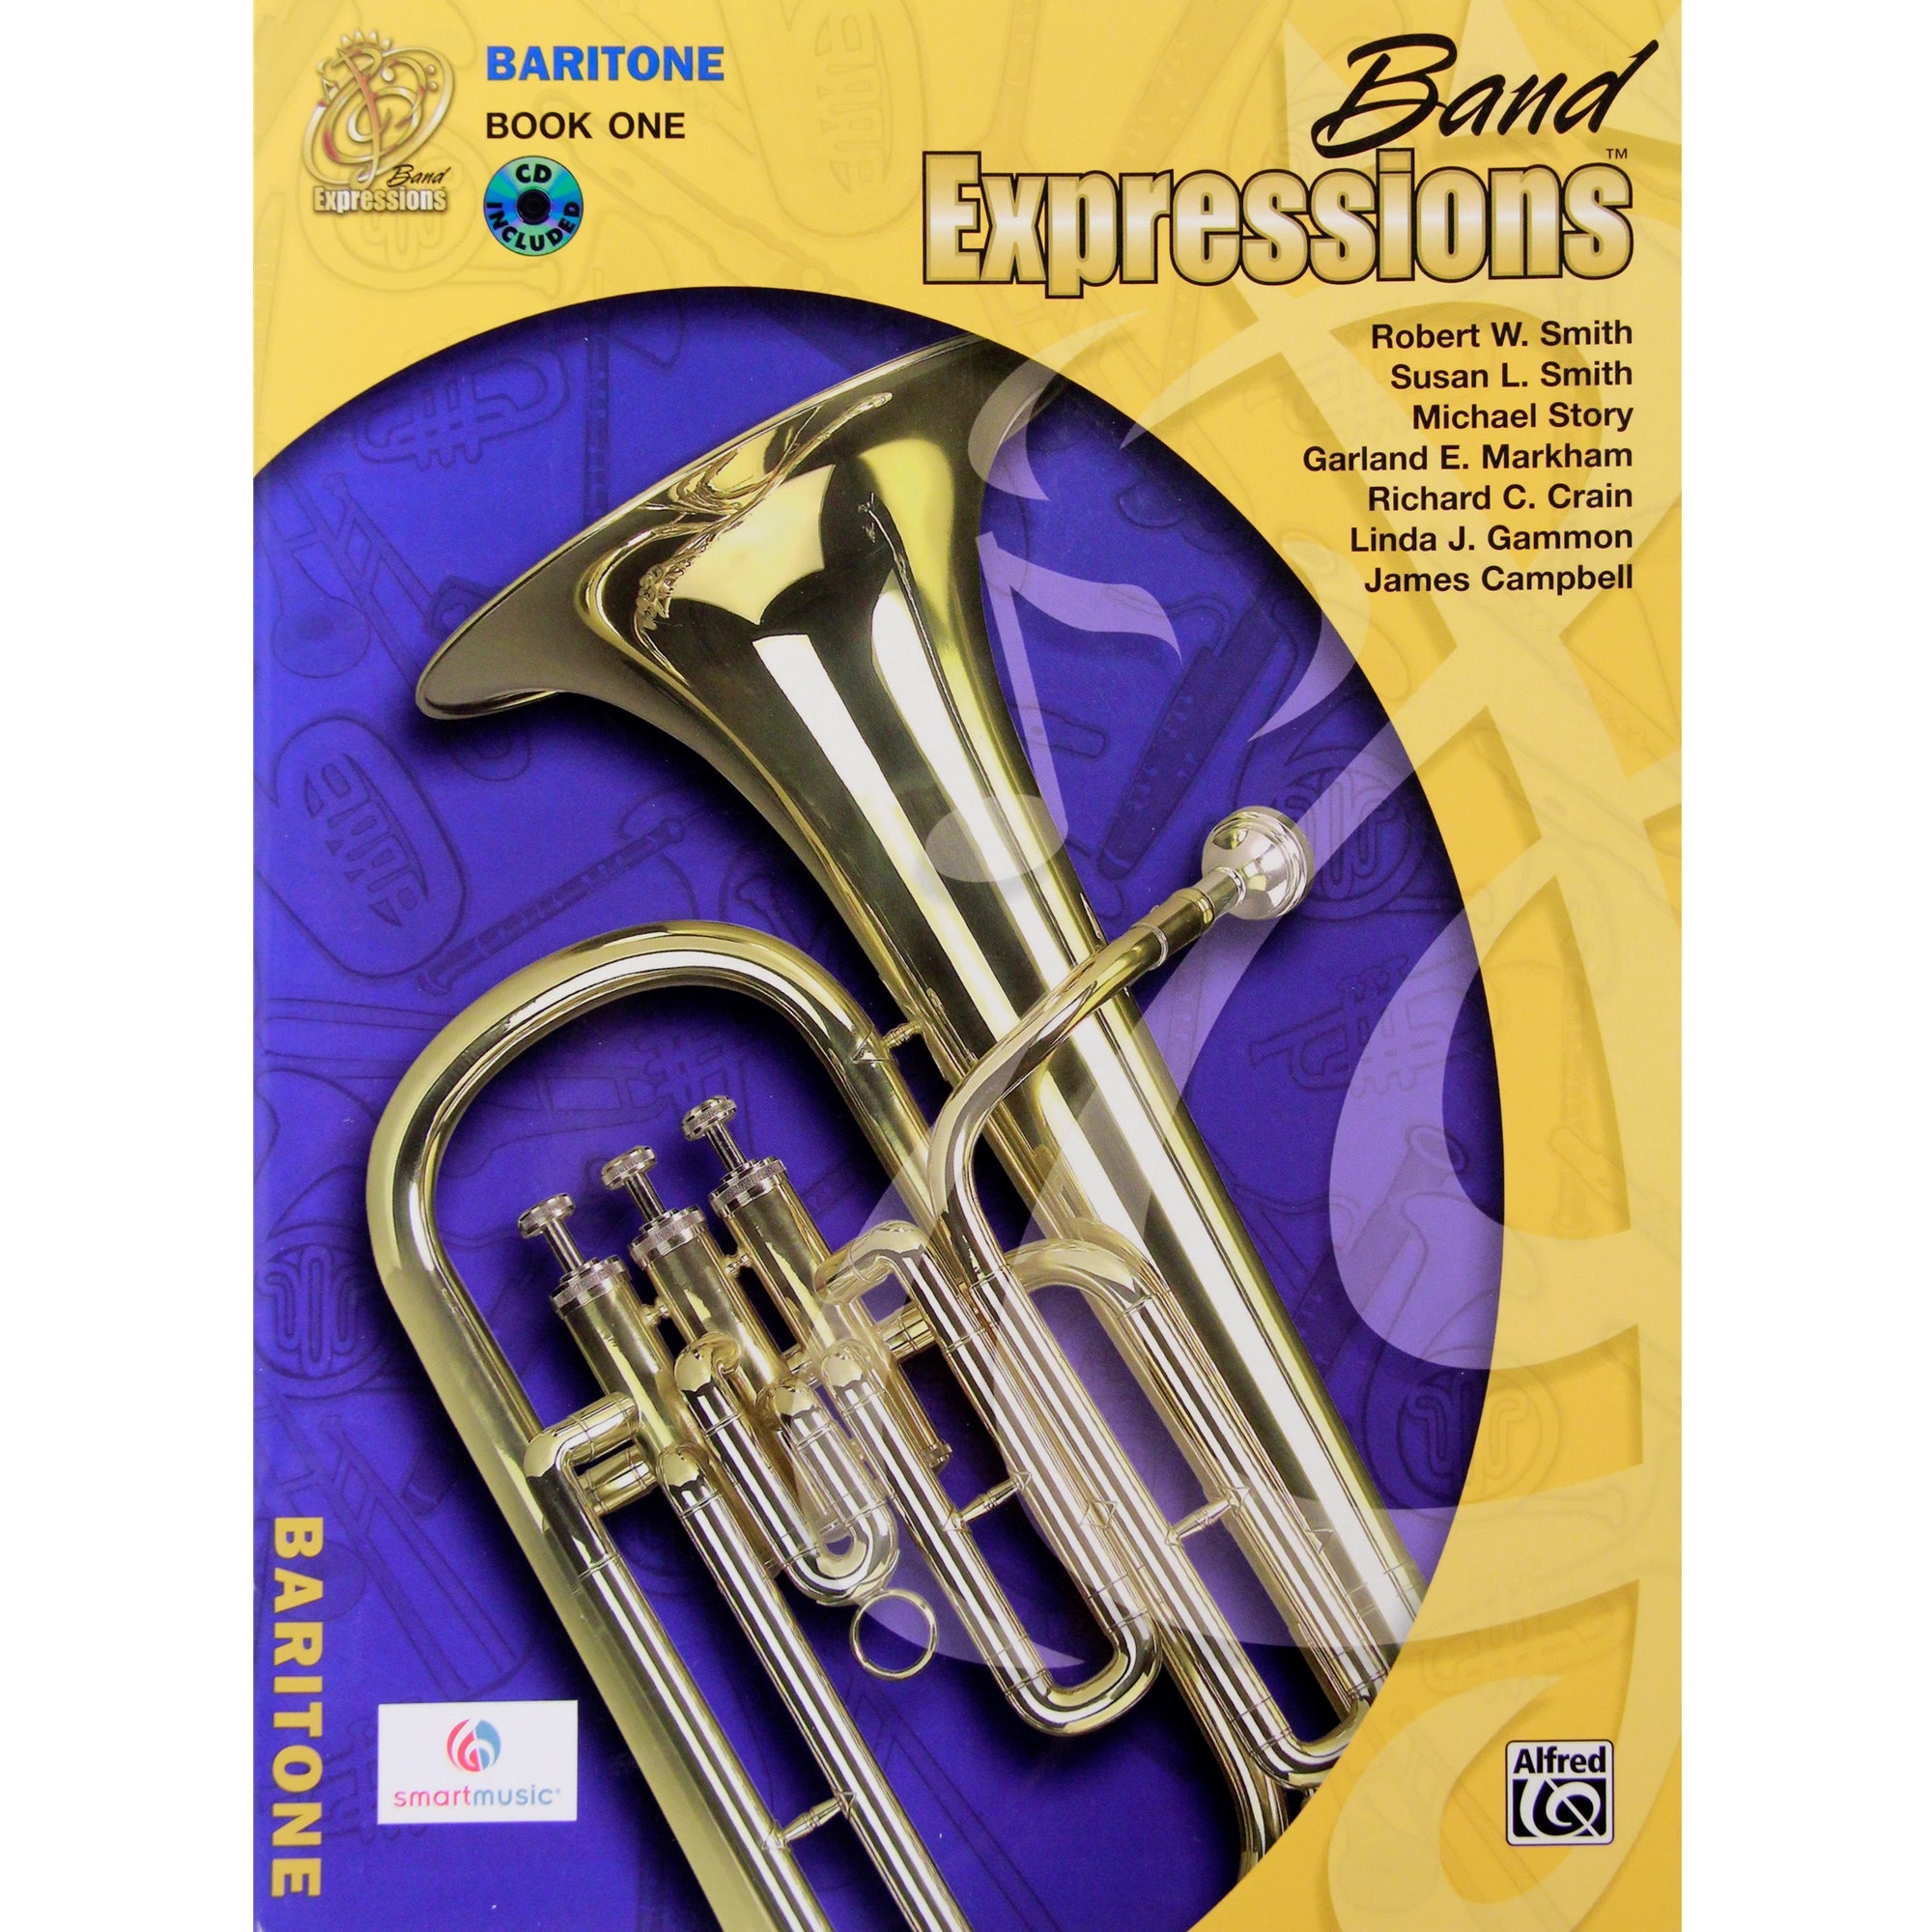 ALFRED 00MCB1014CDX Band Expressions , Book One: Student Edition [Baritone B.C.]